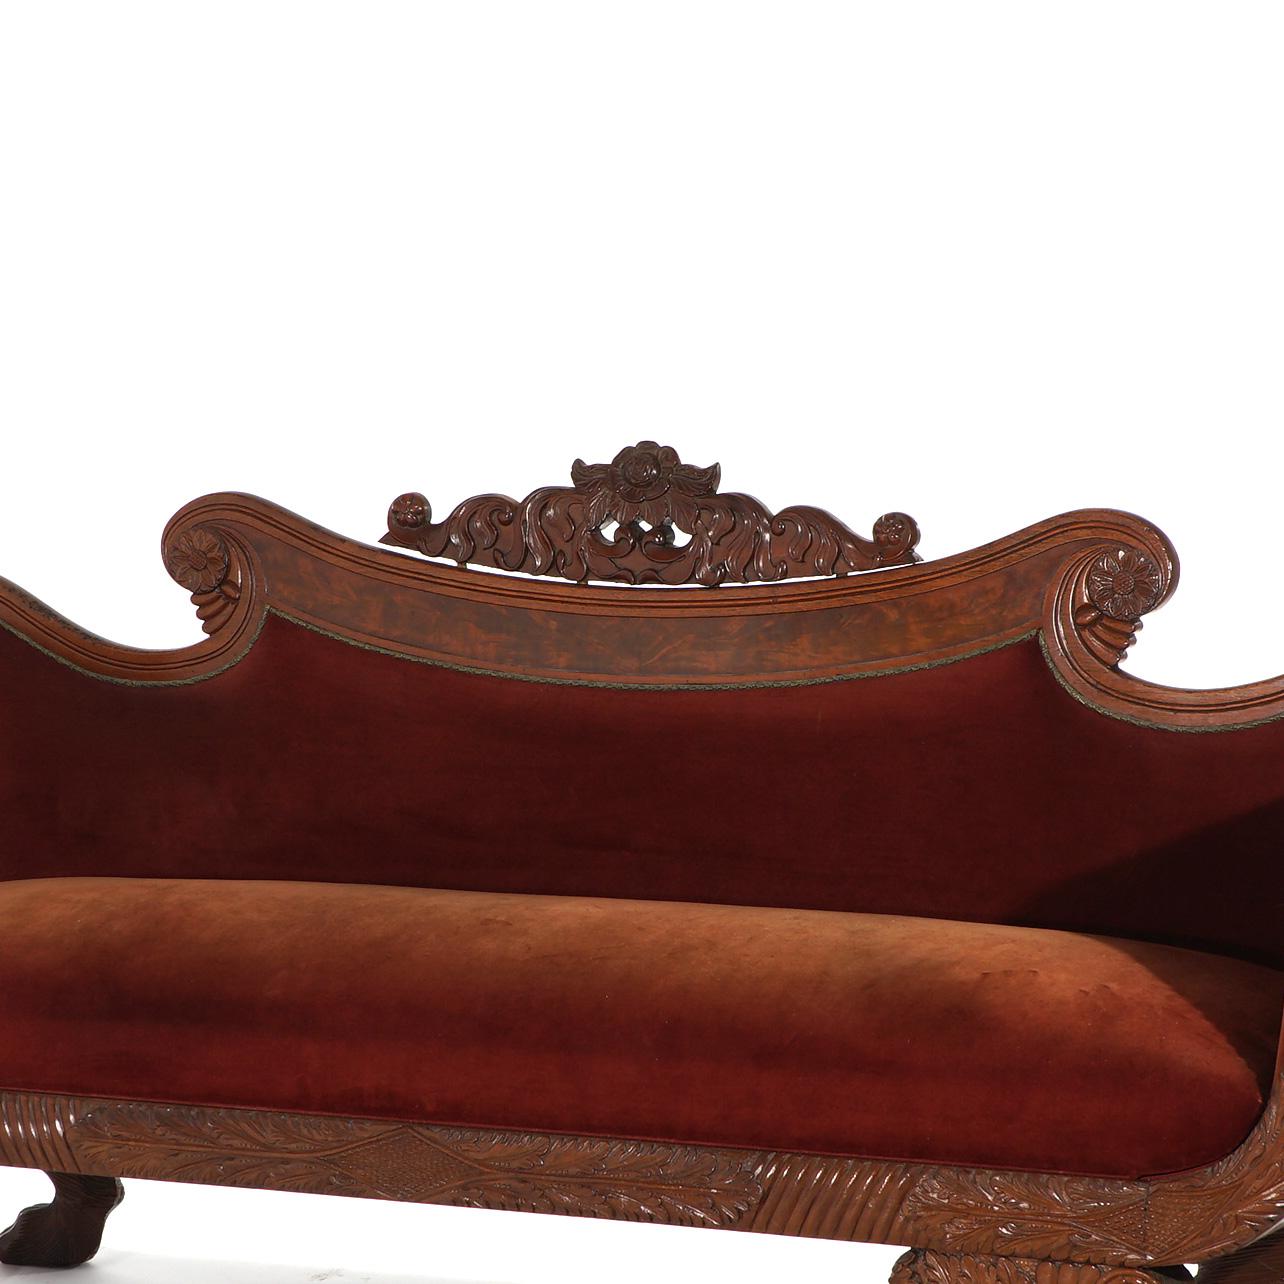 ***Ask About Reduced In-House Delivery Rates - Reliable Professional Service & Fully Insured***
An antique American Empire Greco upholstered sofa offers walnut and burl construction having floral carved crest, scroll arms, foliate elements and paw